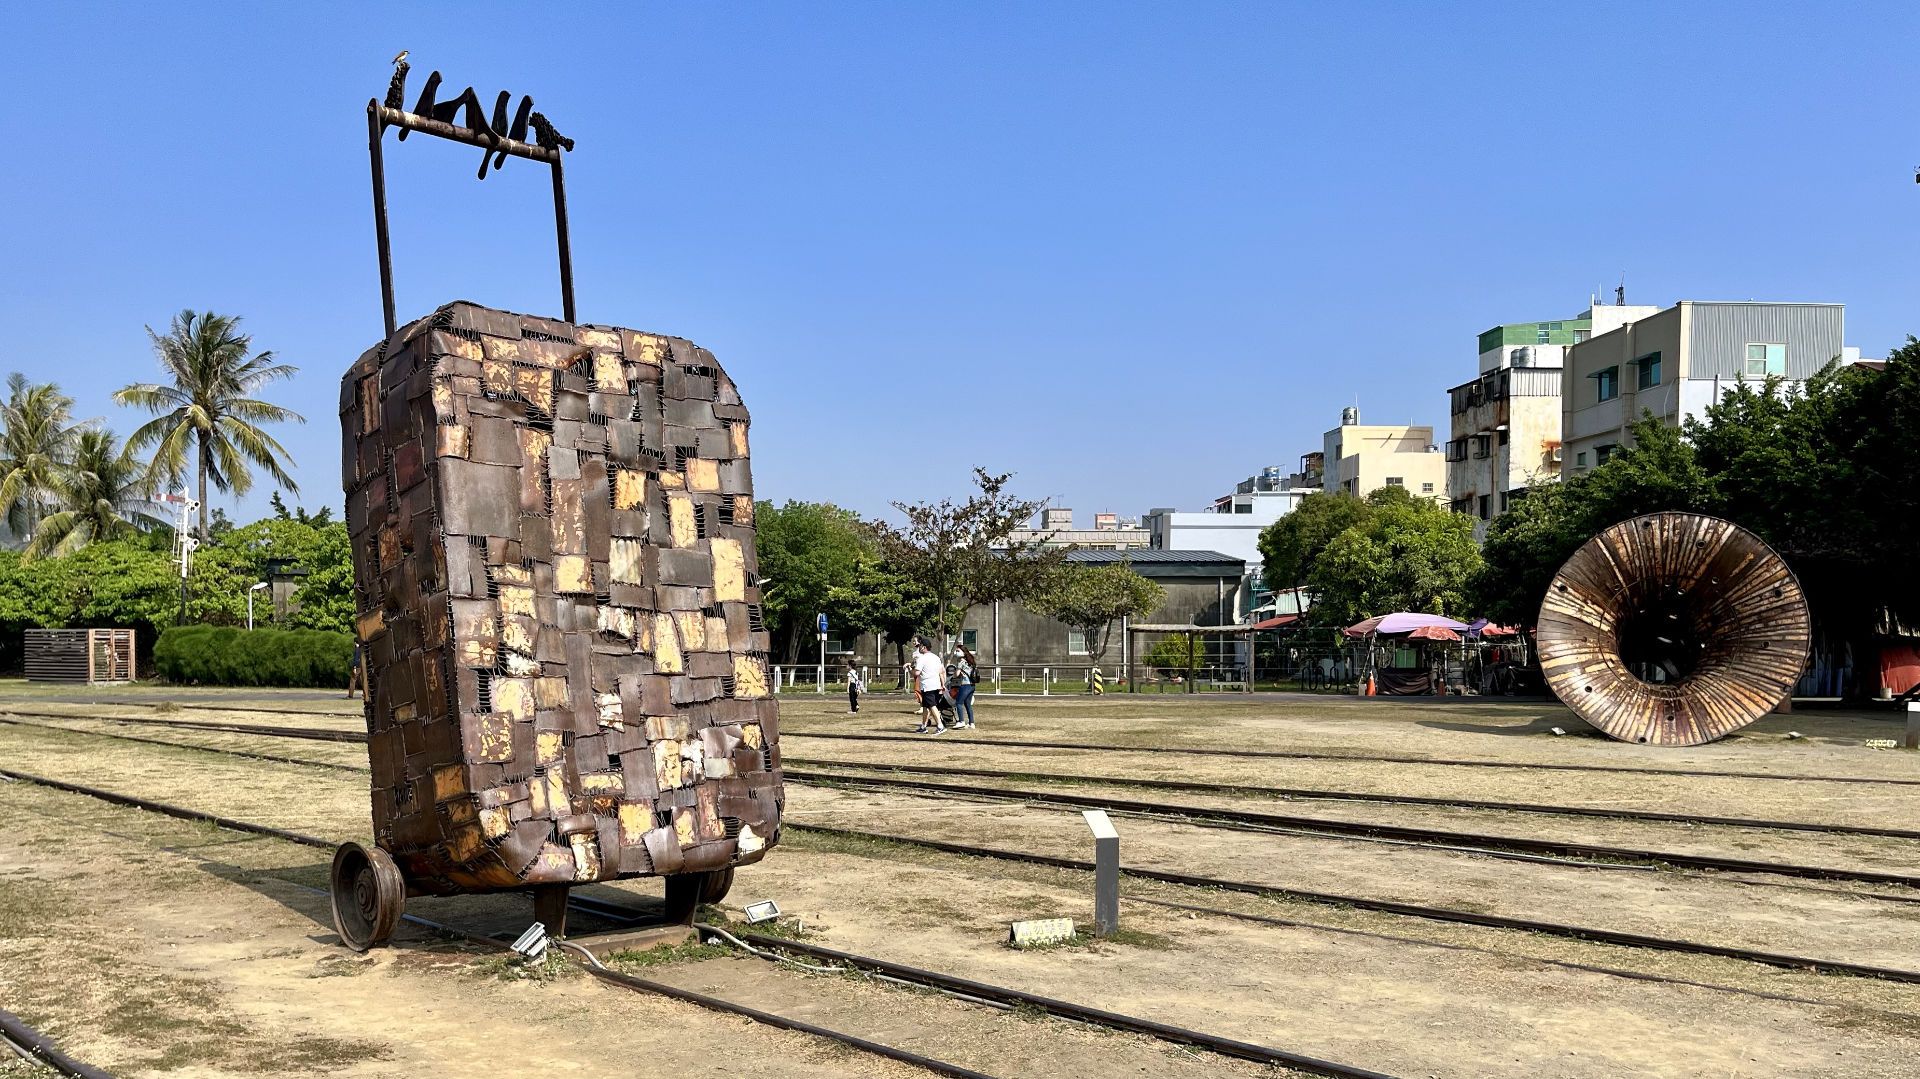 A sculpture of a suitcase on wheels, approximately 5 meters tall, with a giant horn sculpture in the background.